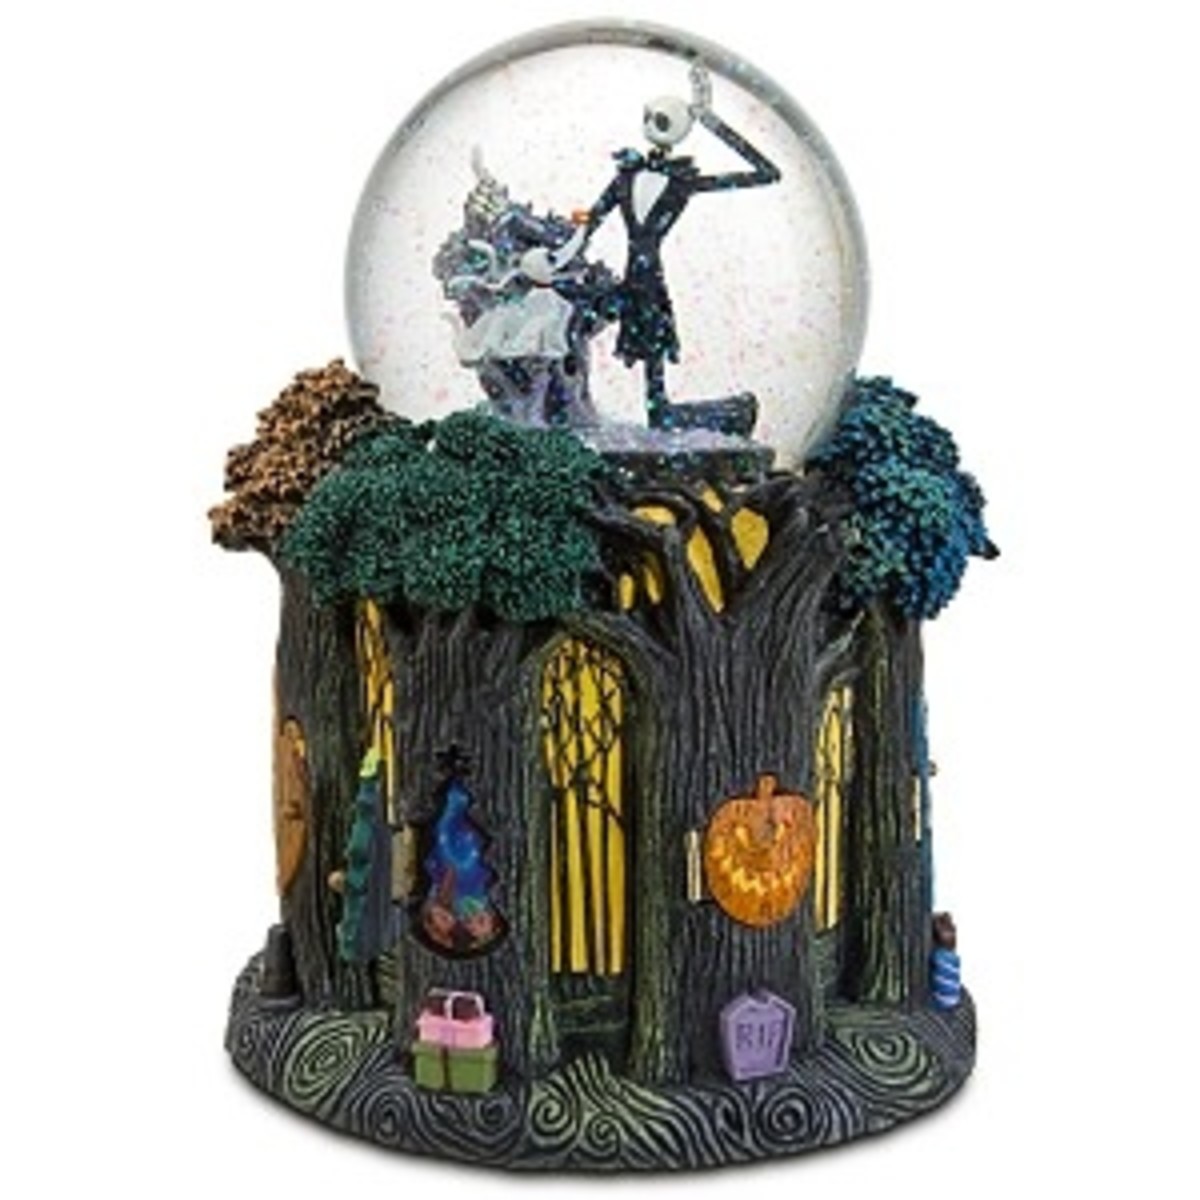 Christmas Snow Globes: A Whimsical History of An Old-Fashioned